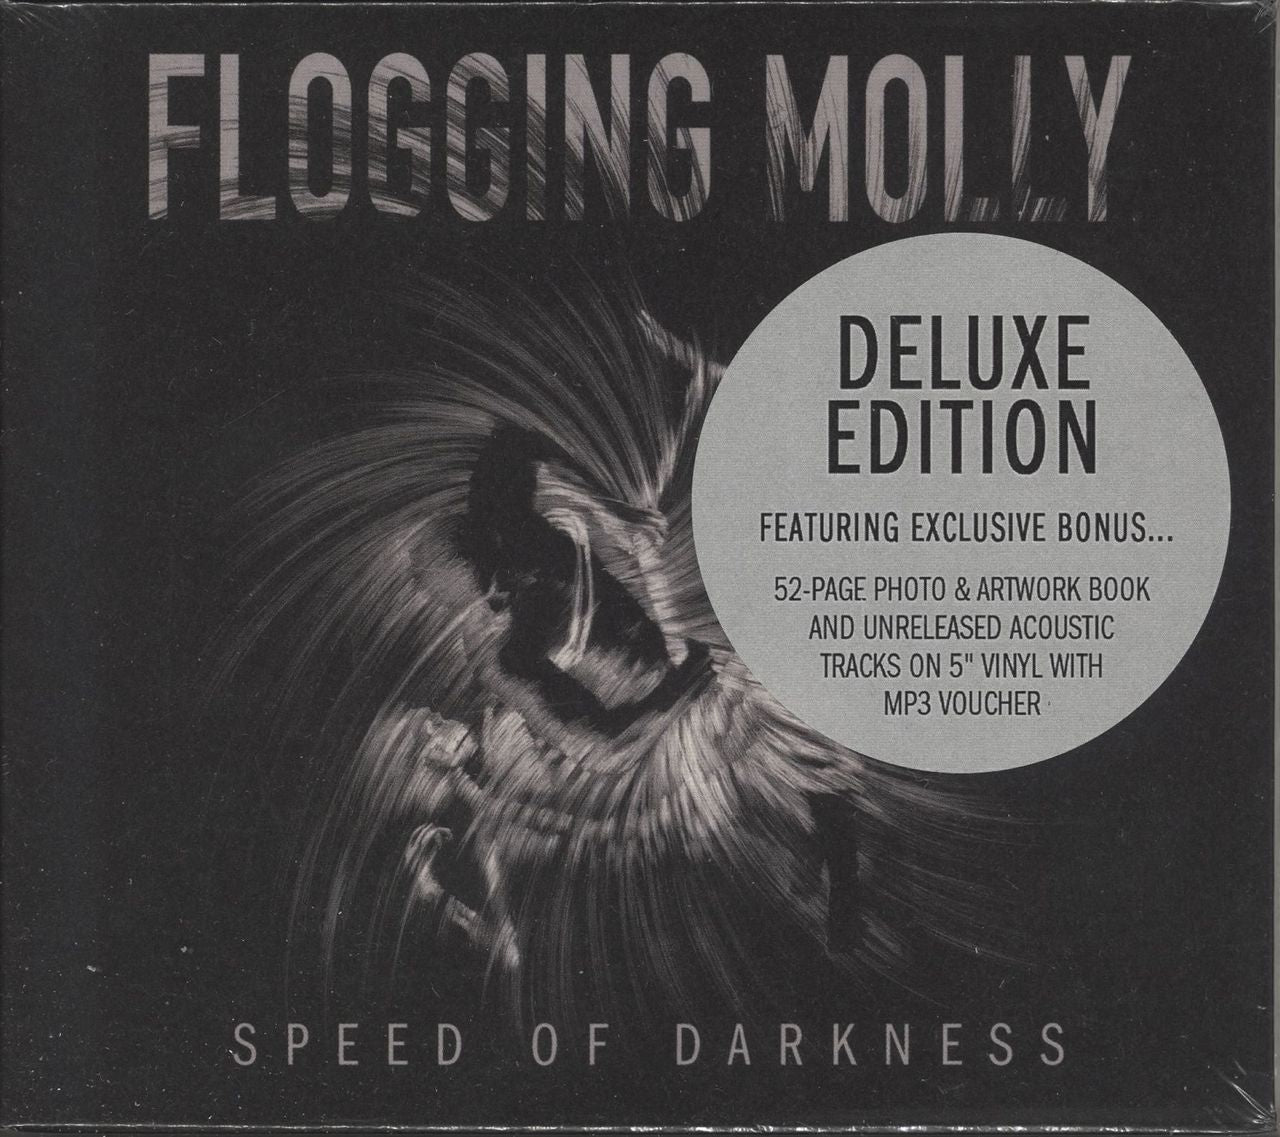 US　Deluxe　Flogging　—　Molly　Sealed　Darkness:　Speed　Of　CD　Edition　Promo